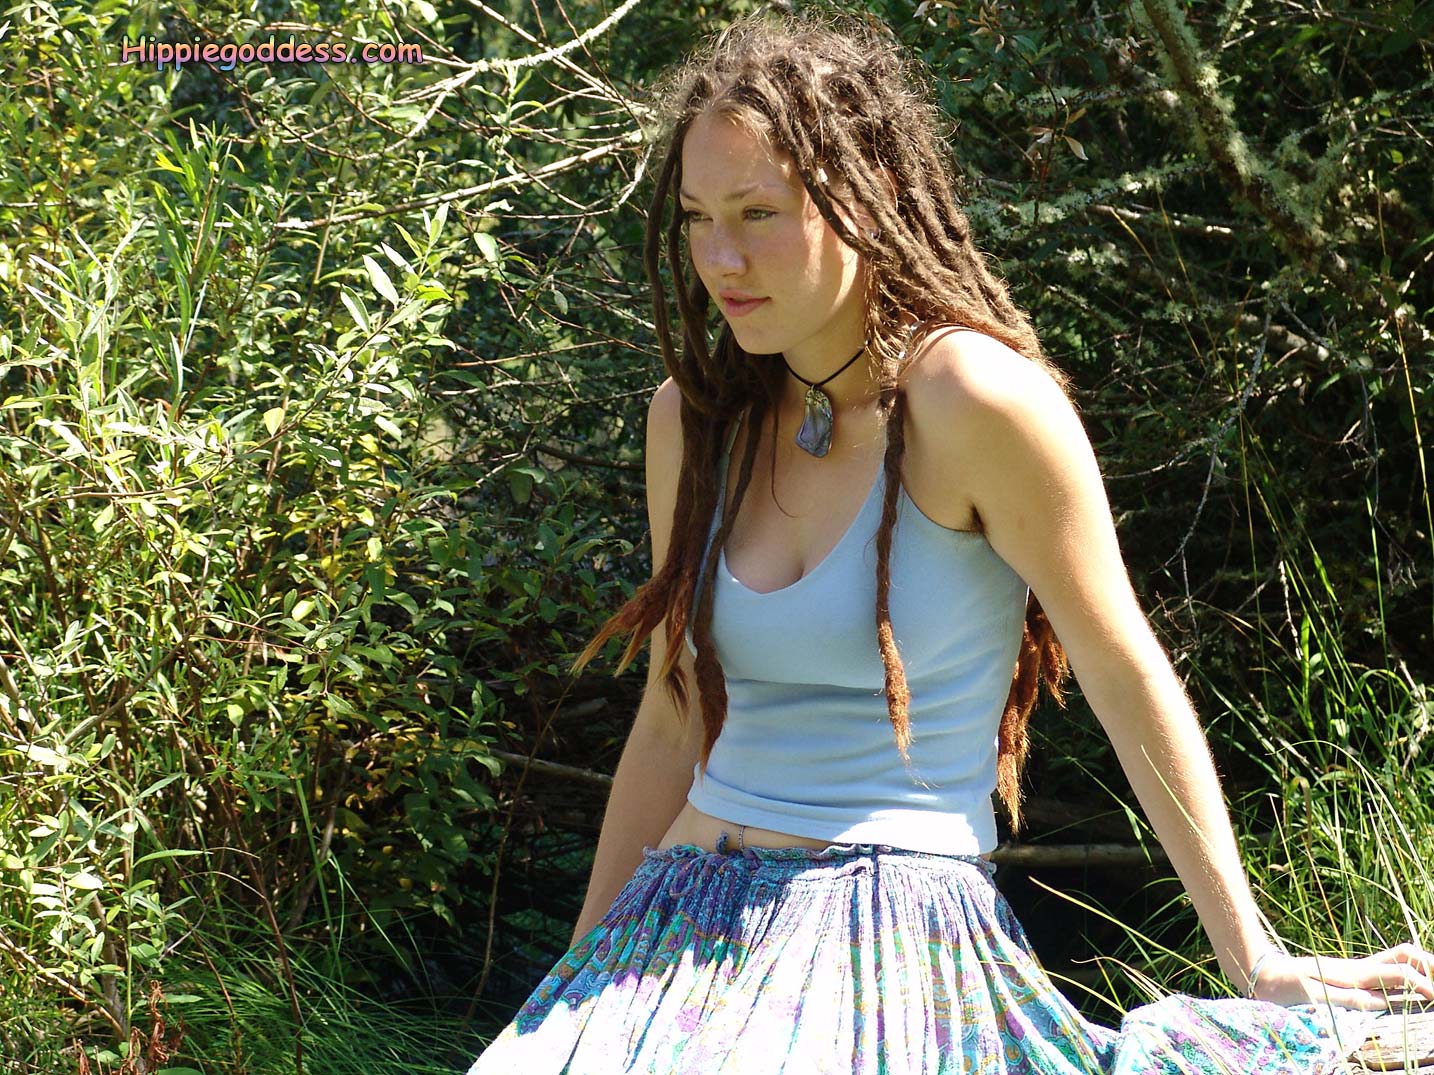 1434px x 1075px - Long dreadlocks, beautiful, hippie girl with hairy pits and full bush,  outdoors.